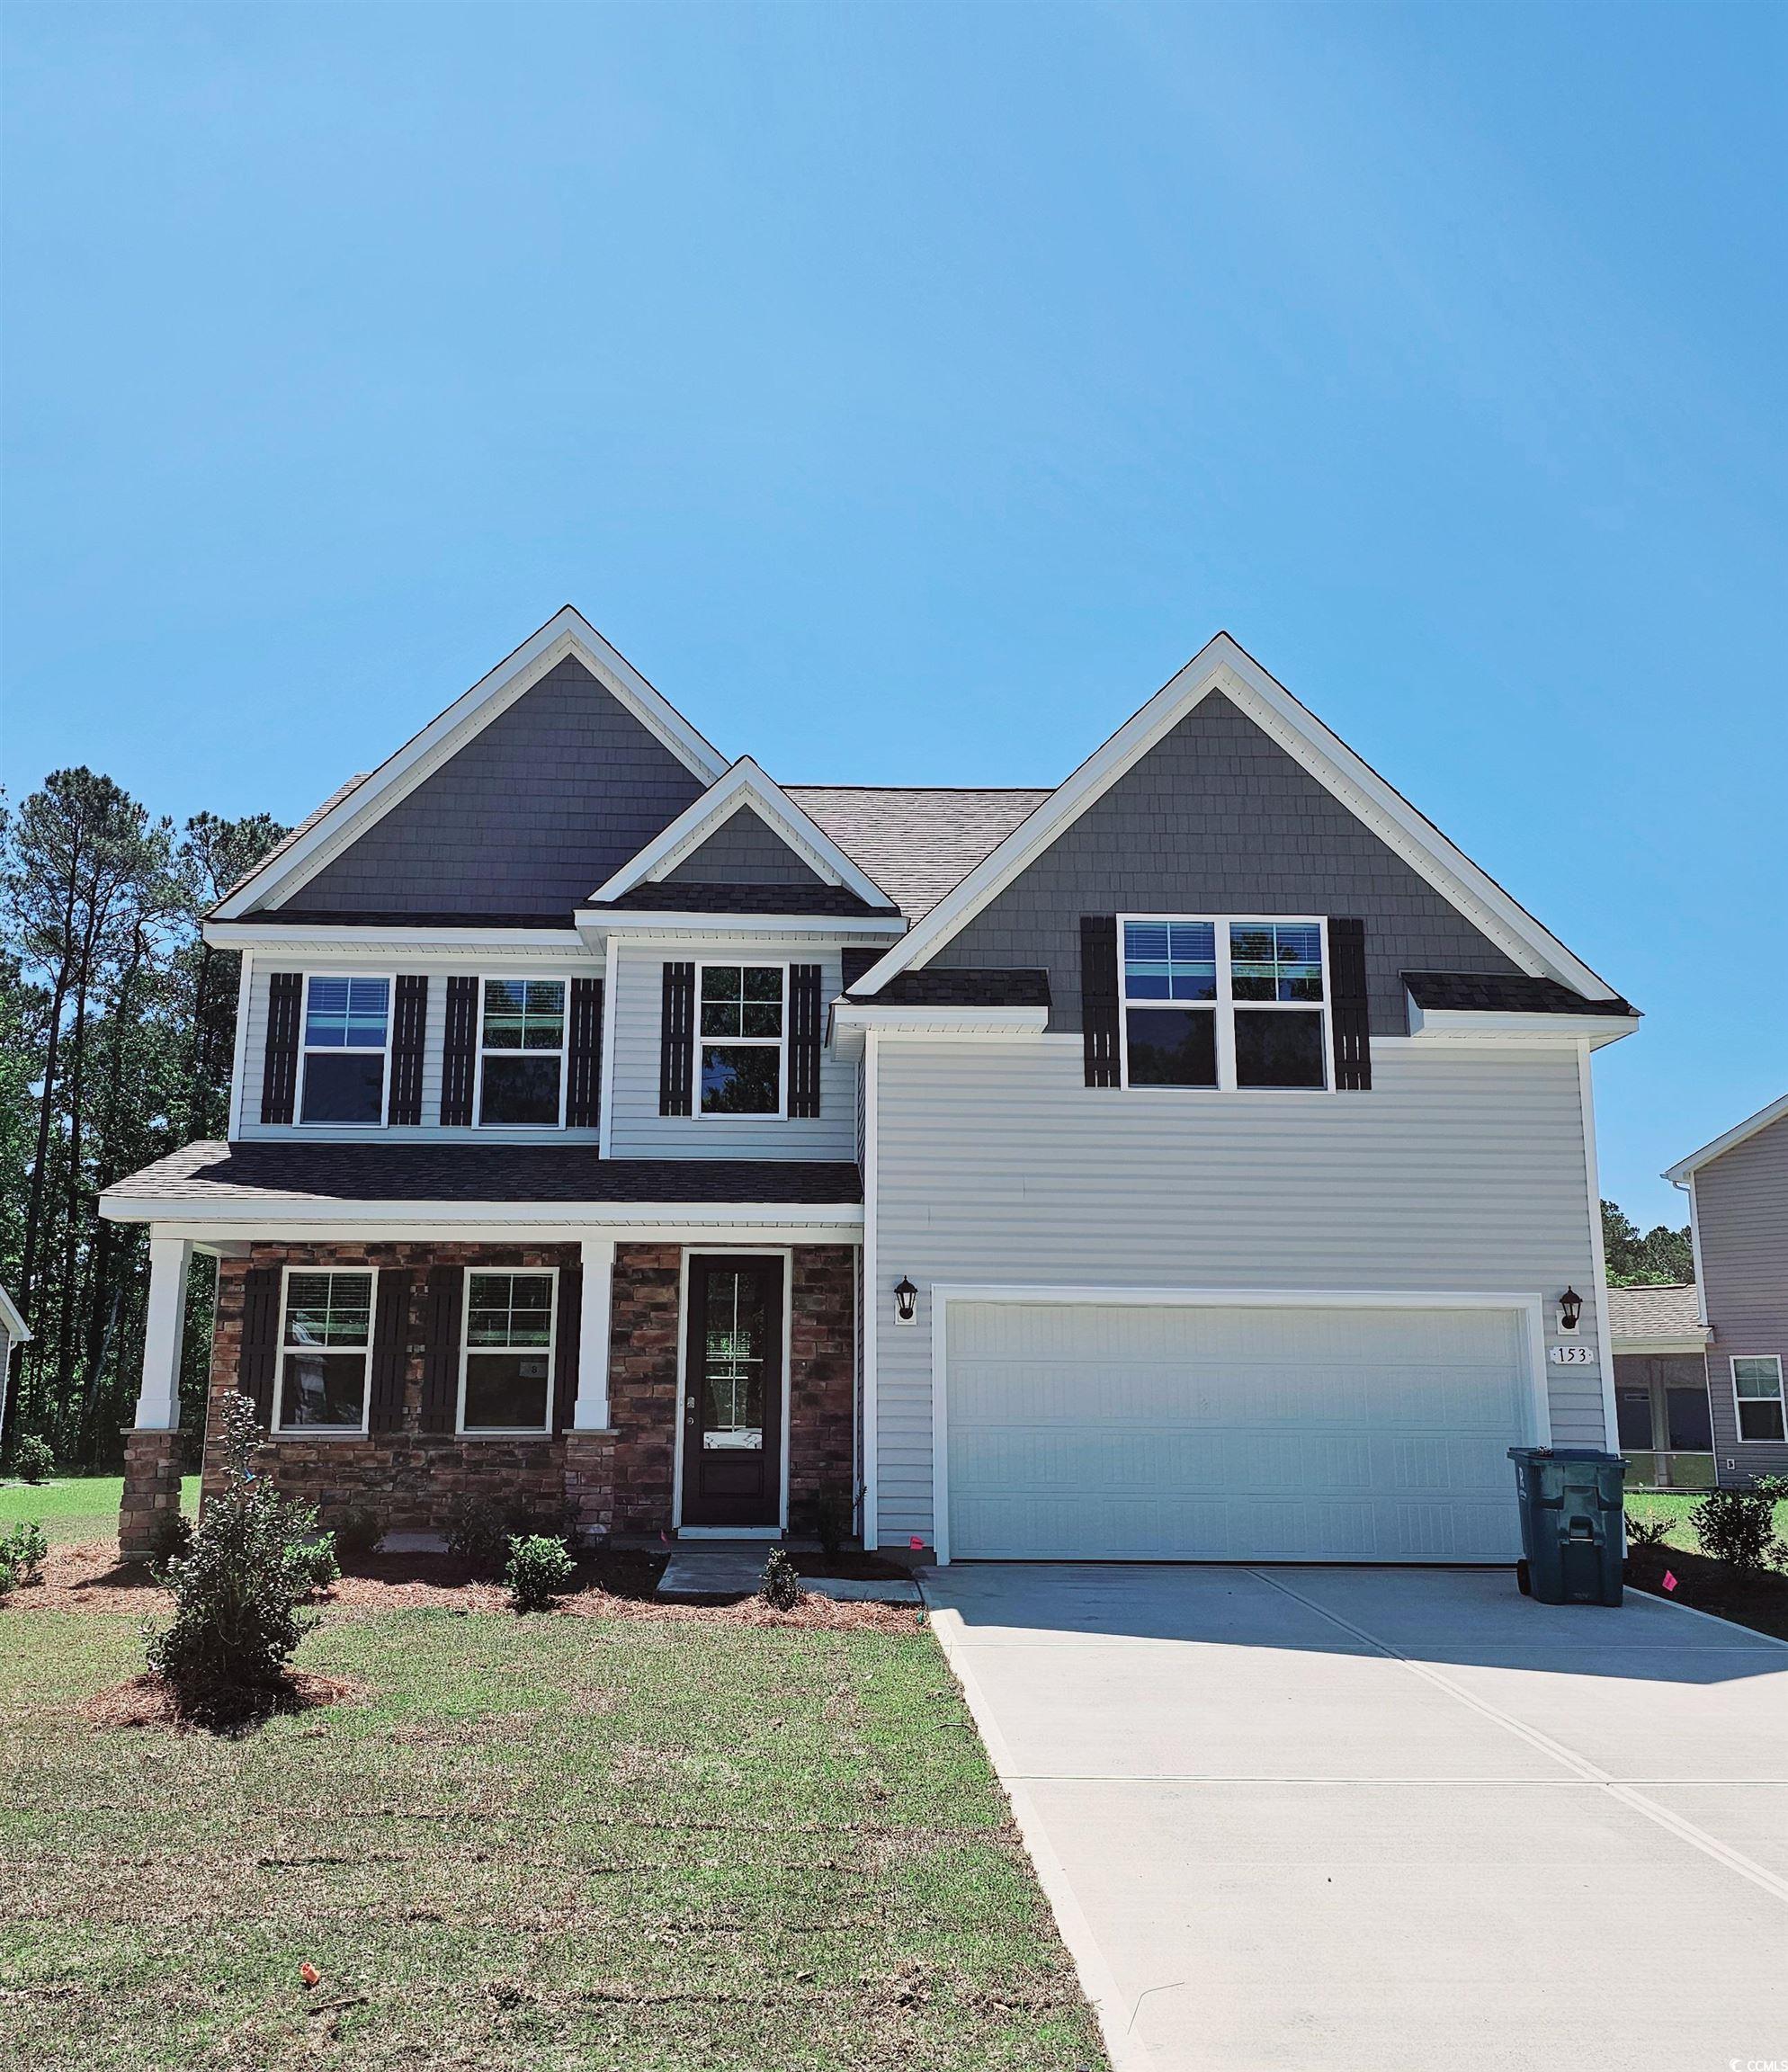 come see out newest community in the murrells inlet conveniently located to all the area has to offer! the forrester is one of our most popular floor plans! when you first enter the home there is a gorgeous 2-story foyer with a catwalk overlooking the entry! you will pass by the elegant formal dining room as you head into your great room and oversized kitchen. the kitchen features one of our largest islands measuring in at nearly 10' long! it also boasts a ton of storage with 36" cabinets. lastly on the first floor is a bedroom and full bath that is great for guests or can double as an office space. head upstairs to your master suite with a large walk-in closet and en suite bathroom with 5ft. shower and spacious double vanity. two additional bedrooms with a full bath in between are across the catwalk. one of the best features of this home is the huge bonus room with vaulted ceilings over the garage that can be the 5th bedroom!  this is america's smart home! each of our homes comes with an industry leading smart home technology package that will allow you to control the thermostat, front door light and lock, and video doorbell from your smartphone or with voice commands to alexa. *photos are of a similar forrester home.  (home and community information, including pricing, included features, terms, availability and amenities, are subject to change prior to sale at any time without notice or obligation. square footages are approximate. pictures, photographs, colors, features, and sizes are for illustration purposes only and will vary from the homes as built. equal housing opportunity builder.)